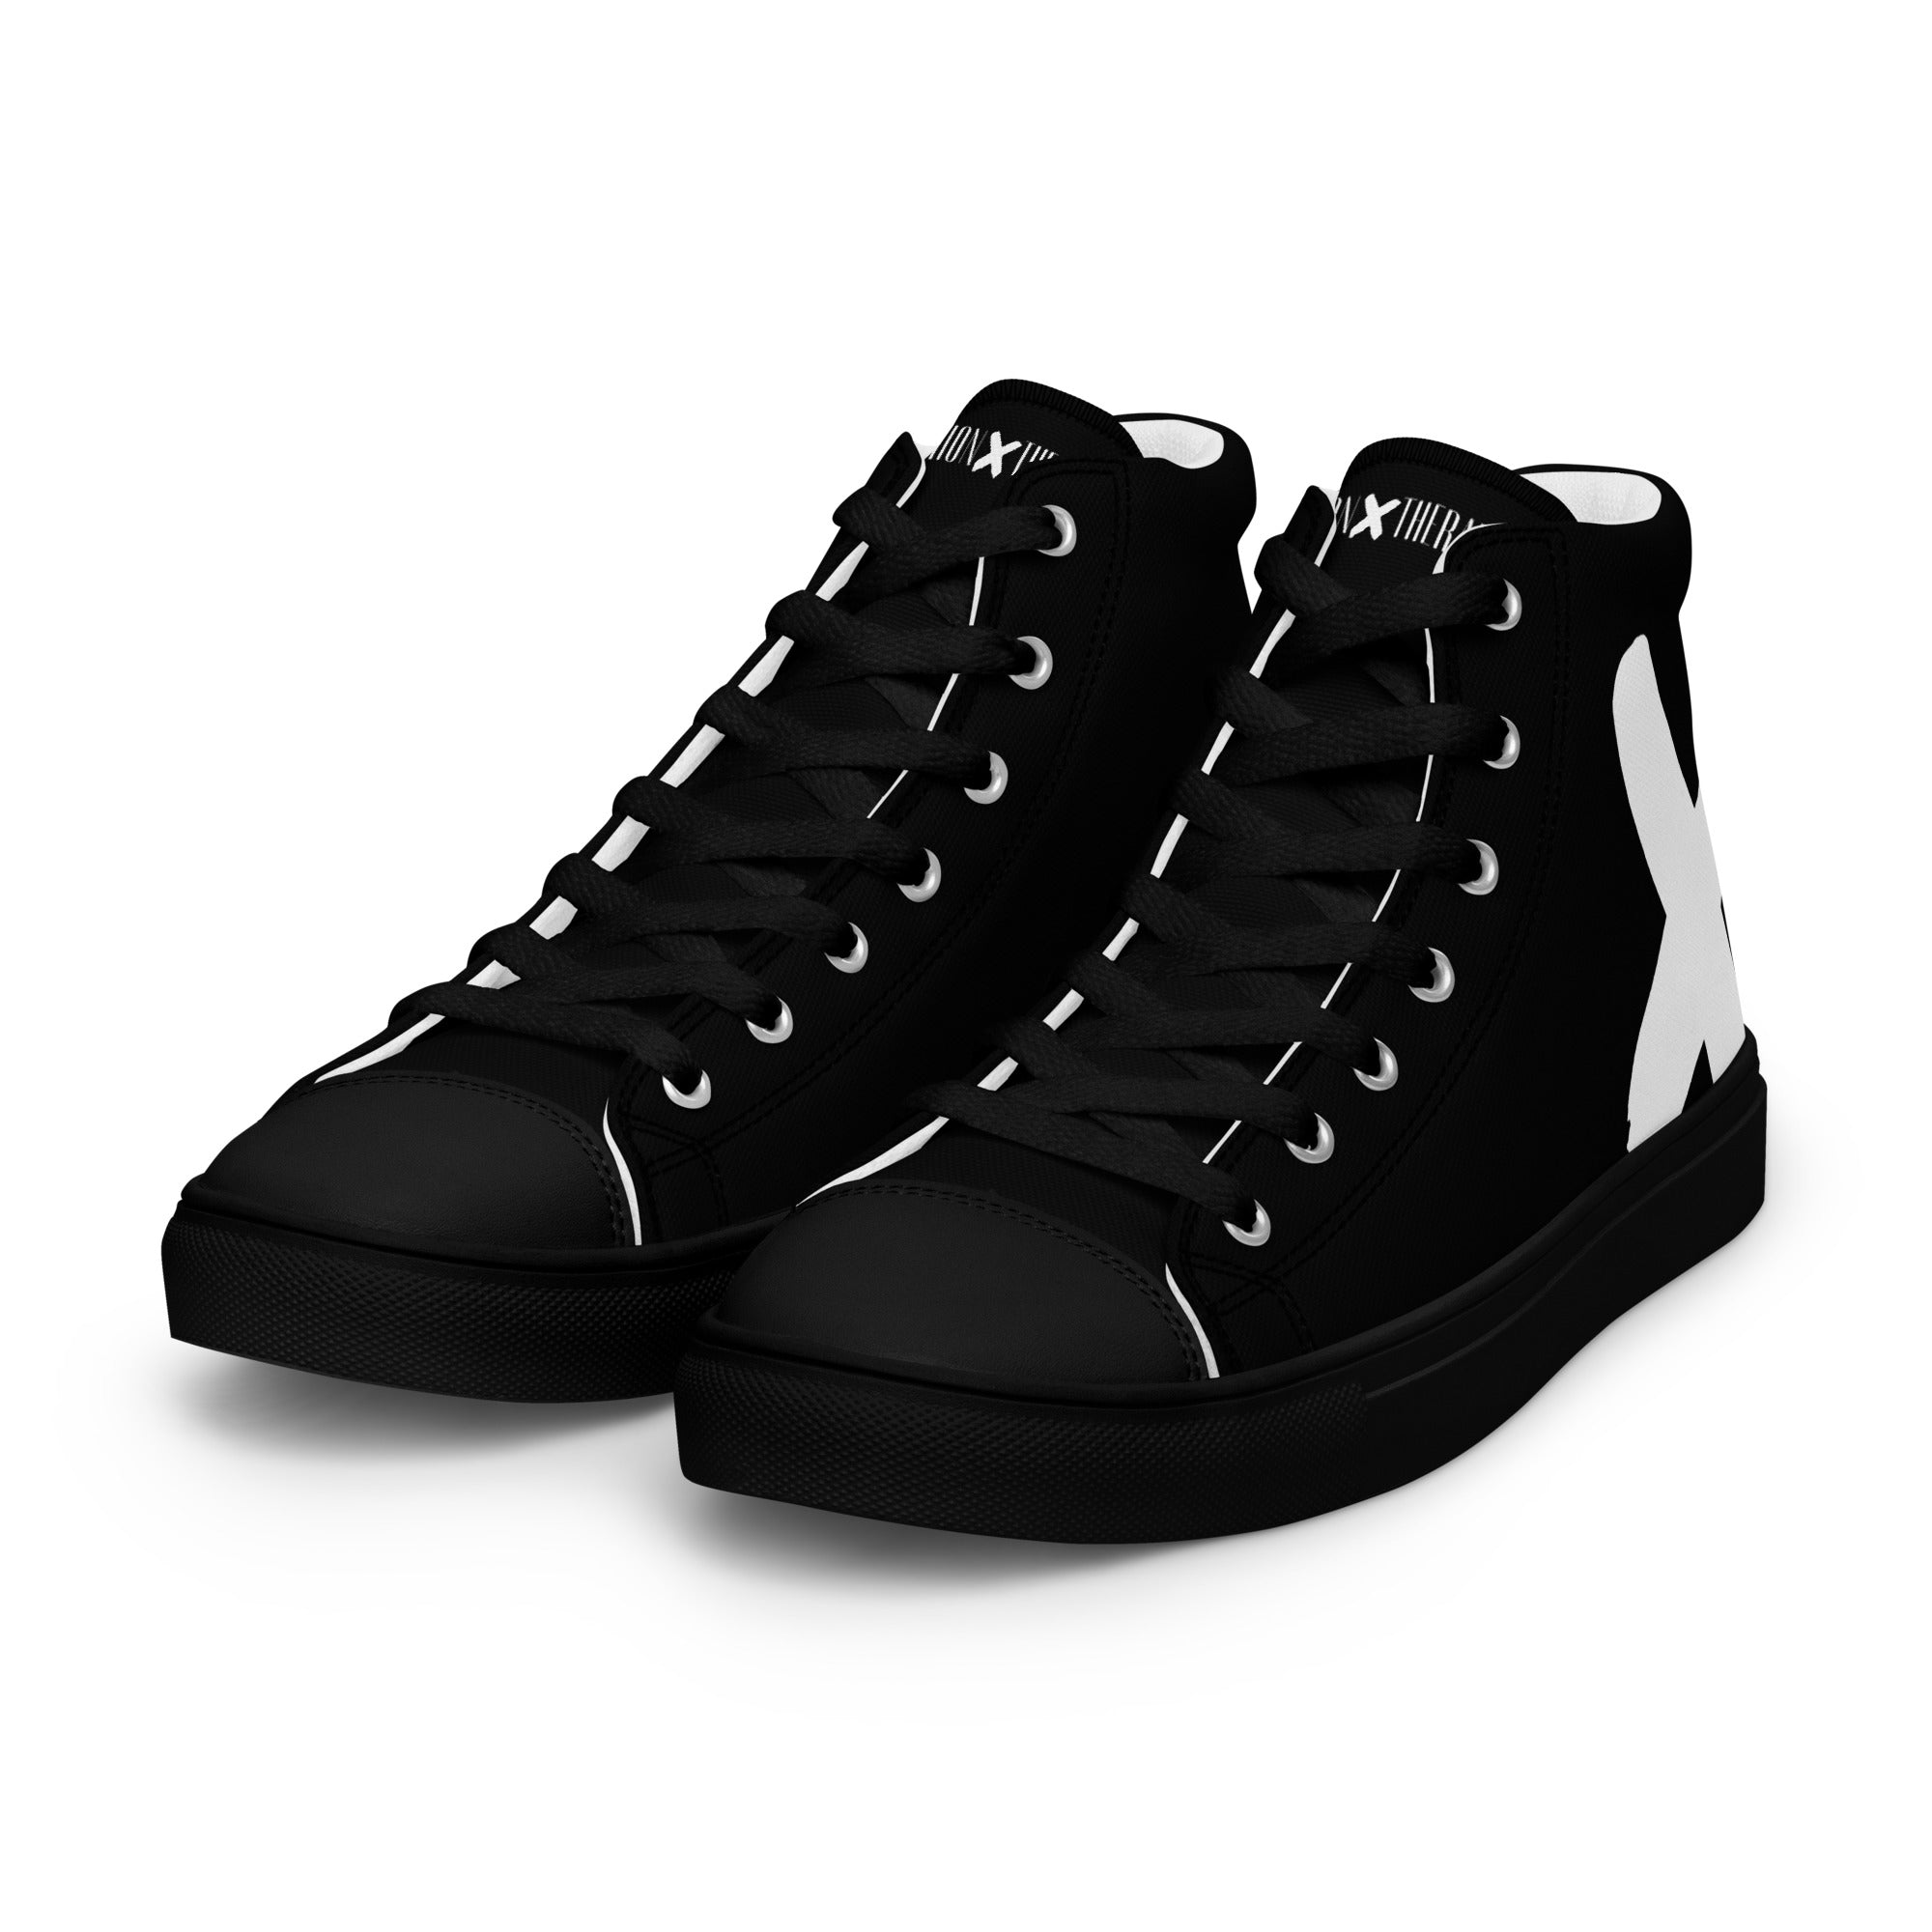 FASHION THERAPY men's high-top canvas sneakers